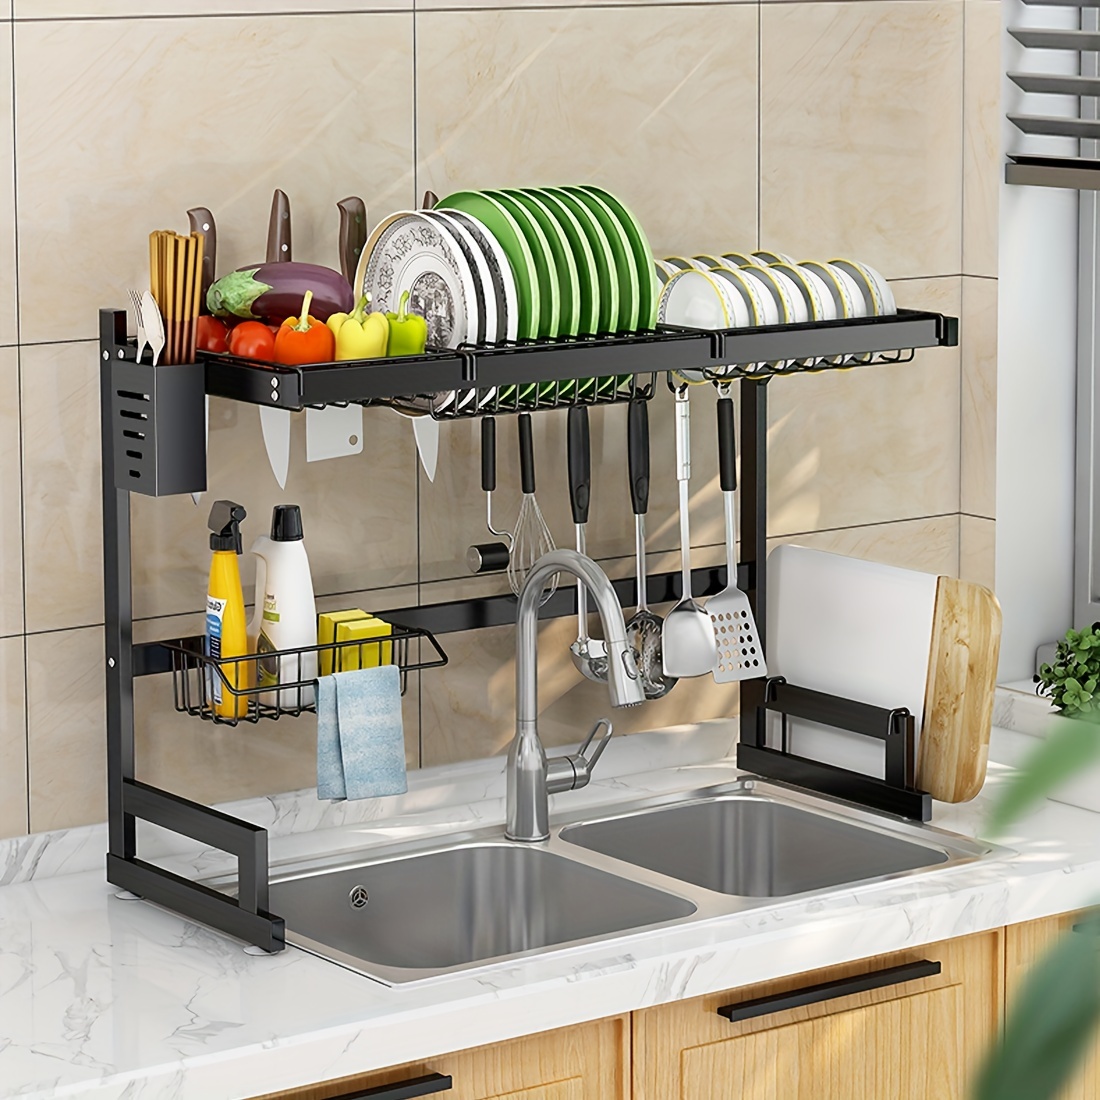 Over Sink Dish Drying Rack Display With Utensil Holder And Utensil